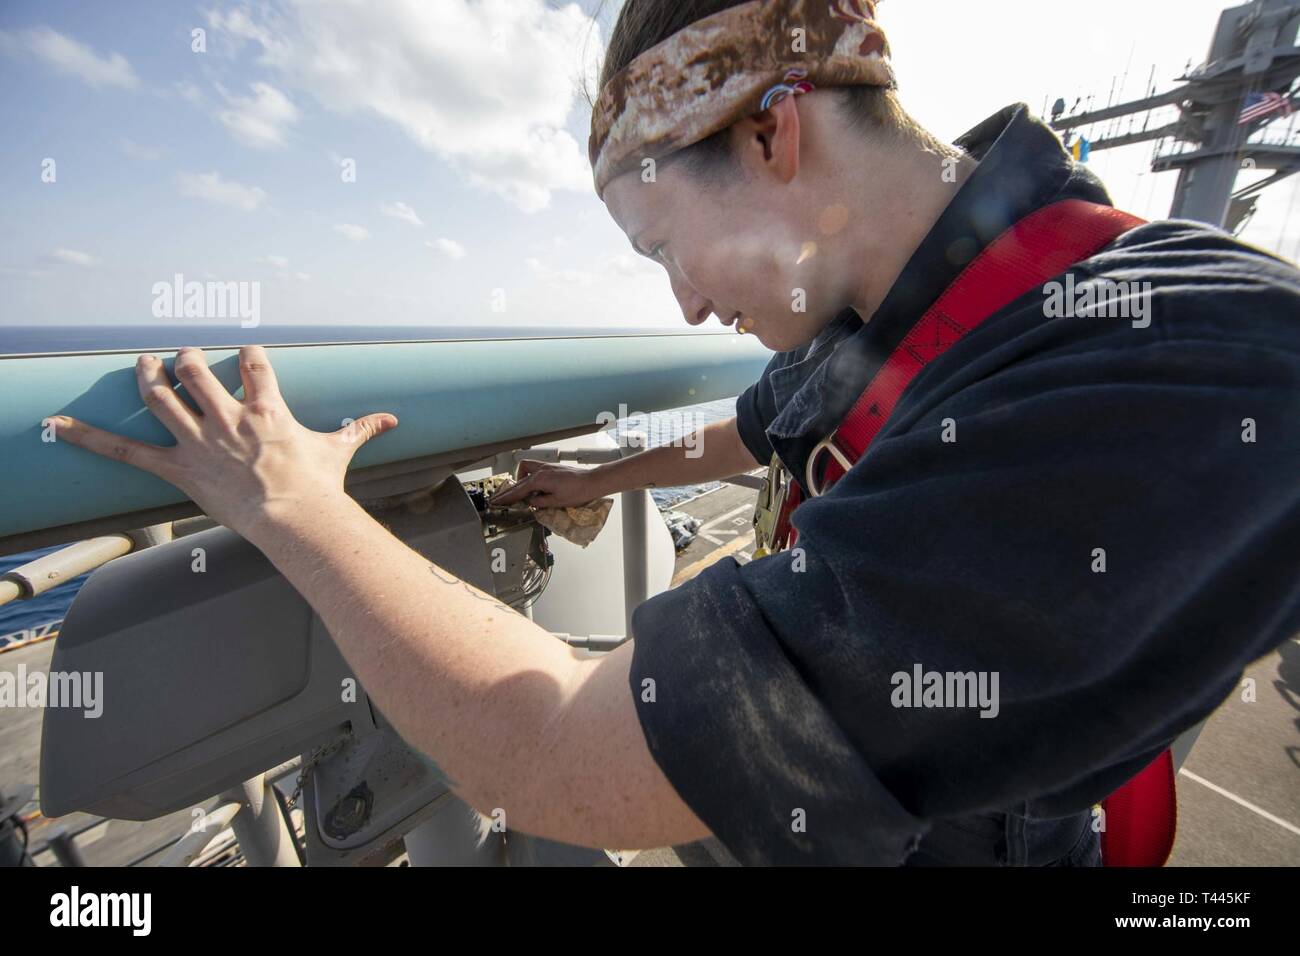 U.S. 5TH FLEET AREA OF OPERATIONS (March 17, 2019) Electronics Technician 3rd Class Sara Head inspects the SPS-73 radar aboard the Wasp-class amphibious assault ship USS Kearsarge (LHD 3). Kearsarge is the flagship for the Kearsarge Amphibious Ready Group and, with the embarked 22nd Marine Expeditionary Unit, is deployed to the U.S. 5th Fleet area of operations in support of naval operations to ensure maritime stability and security in the Central Region, connecting the Mediterranean and the Pacific through the western Indian Ocean and three strategic choke points. Stock Photo